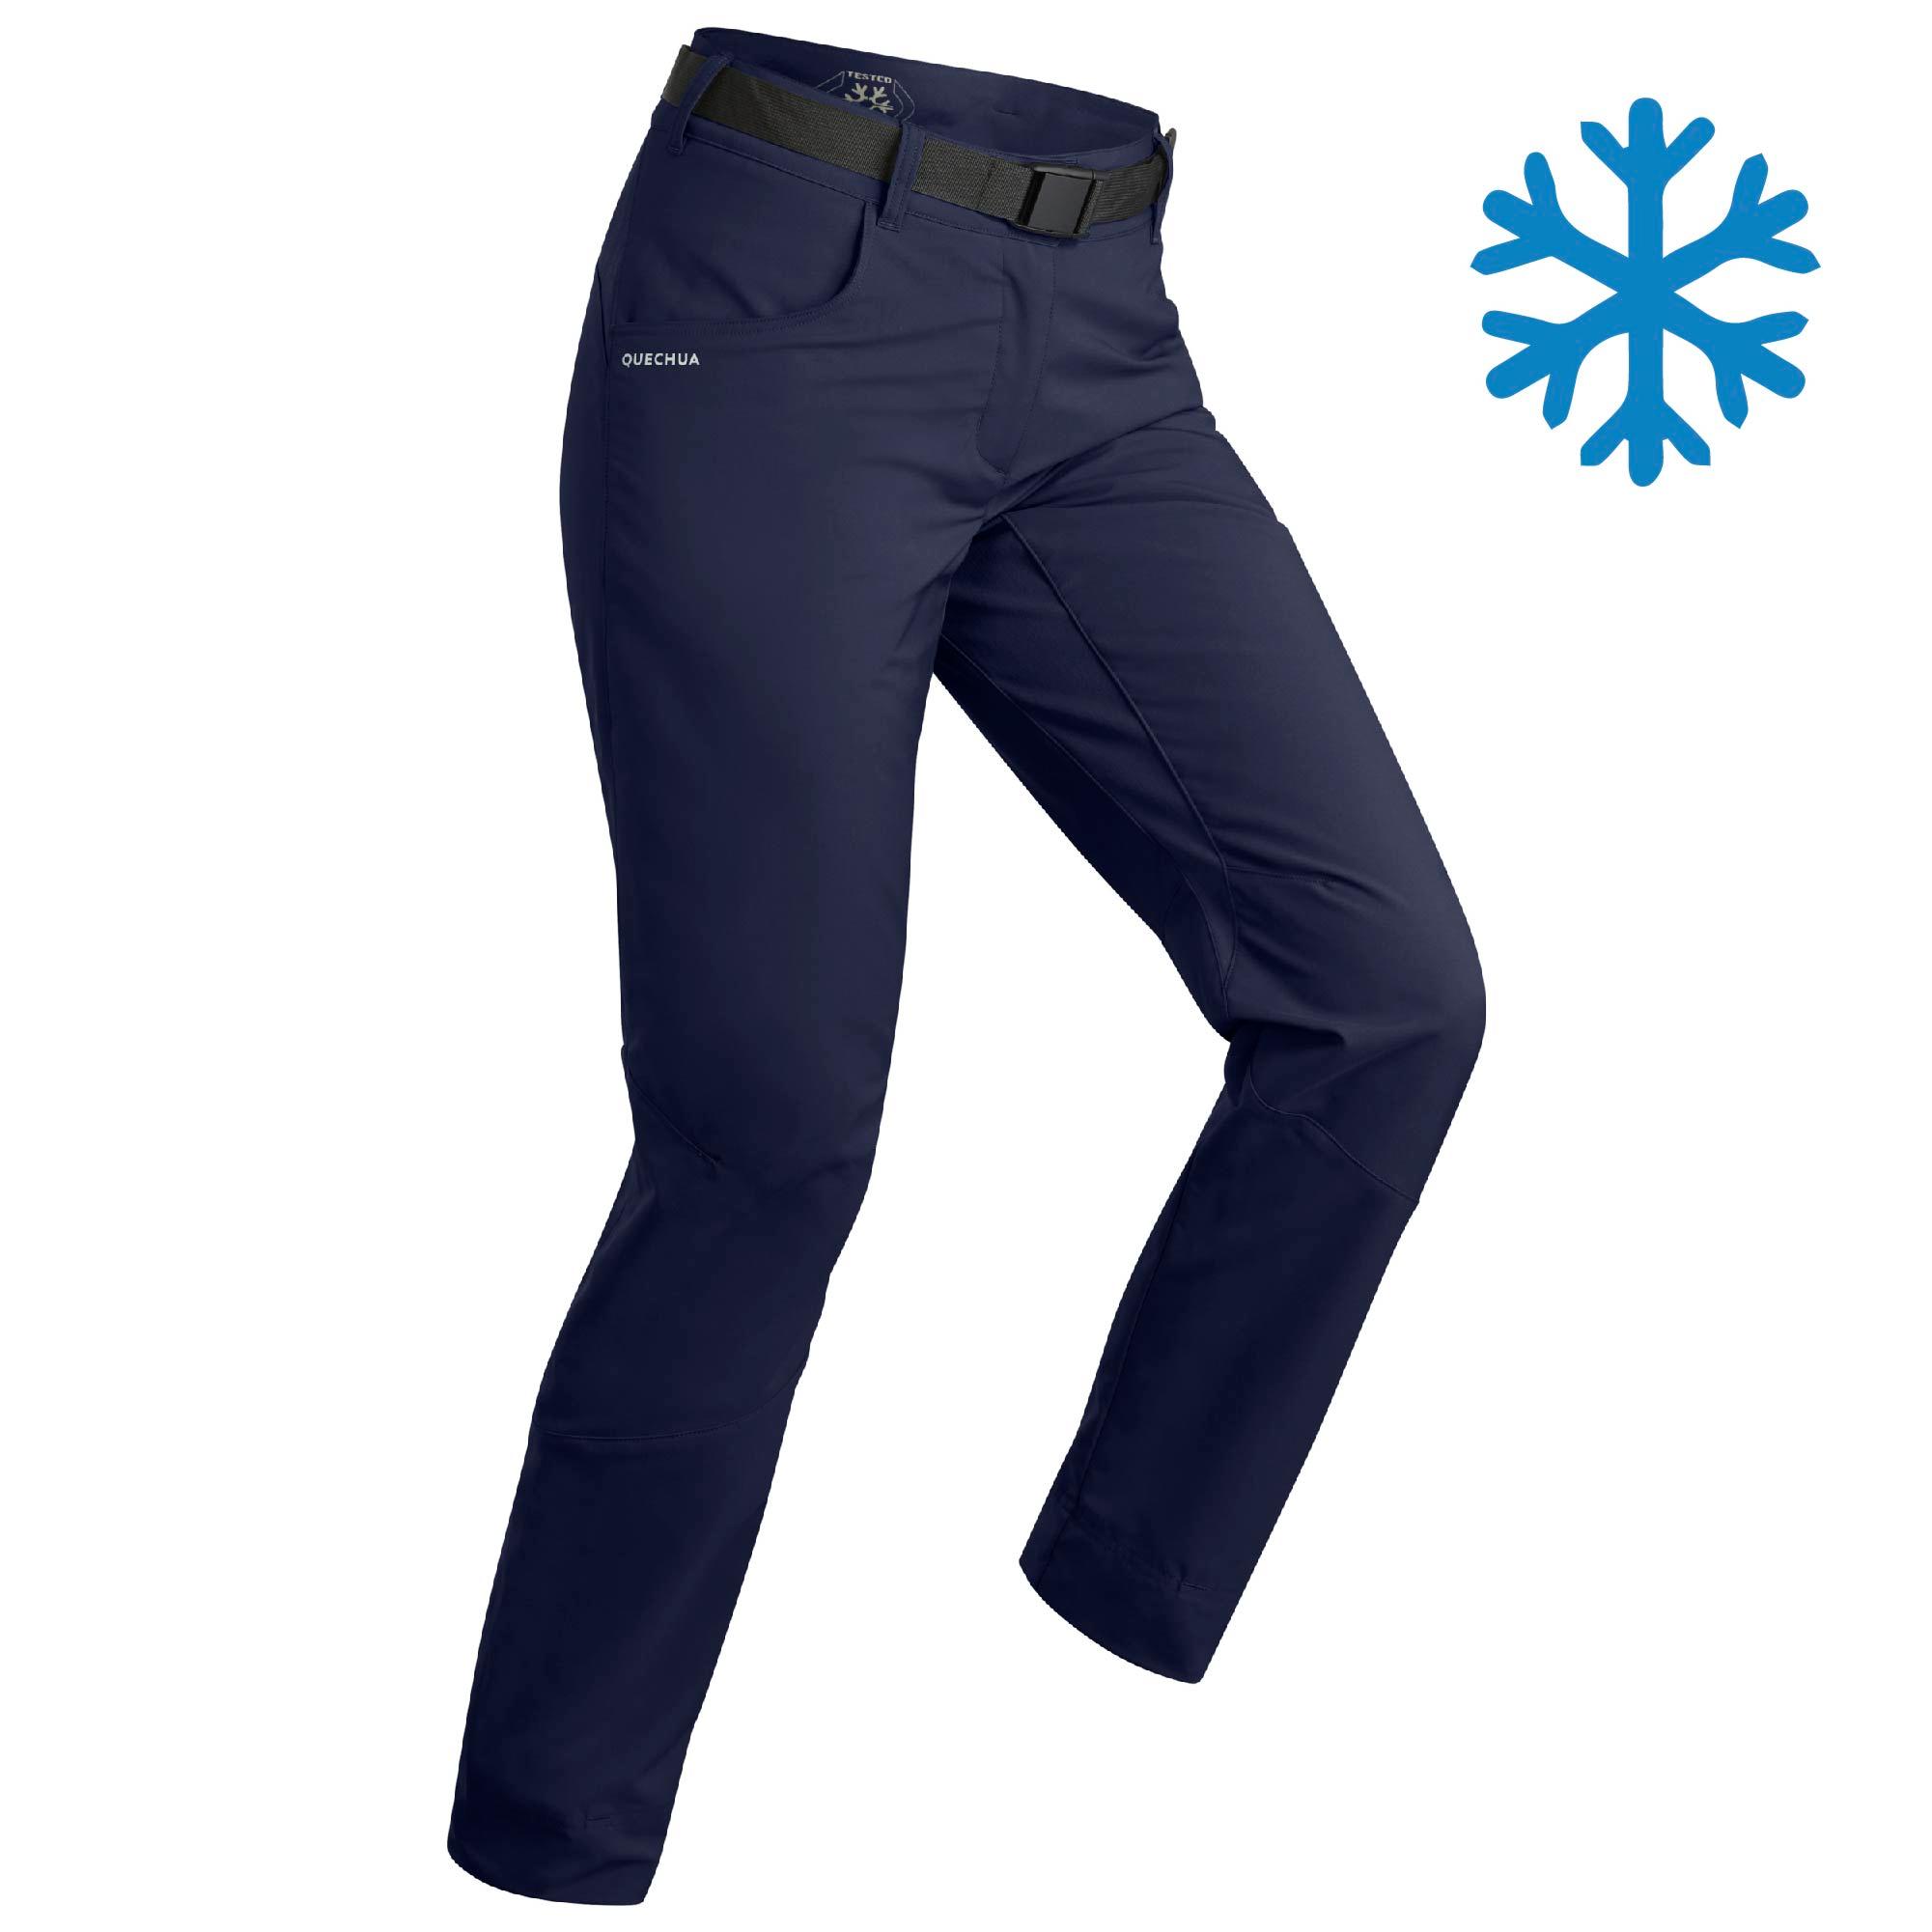 Buy Convertible Trousers Online | Grey Trekking Trousers for Men at Forclaz  by Decathlon